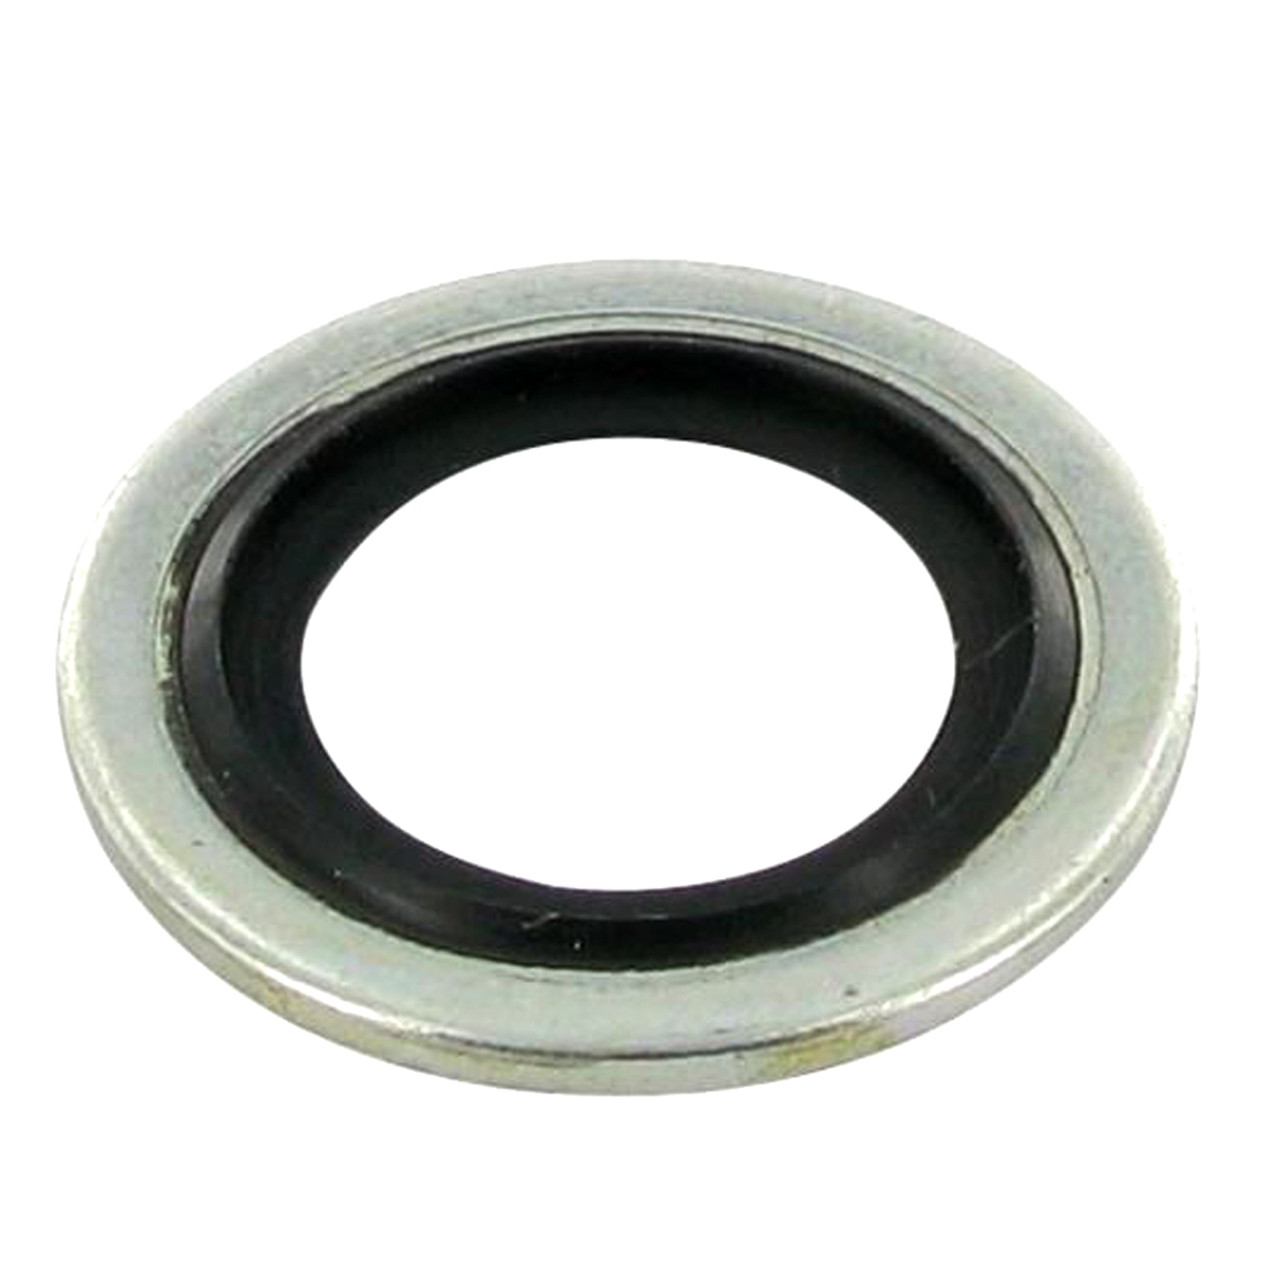 3/8 BSP Bonded Washer Seal - PP45C